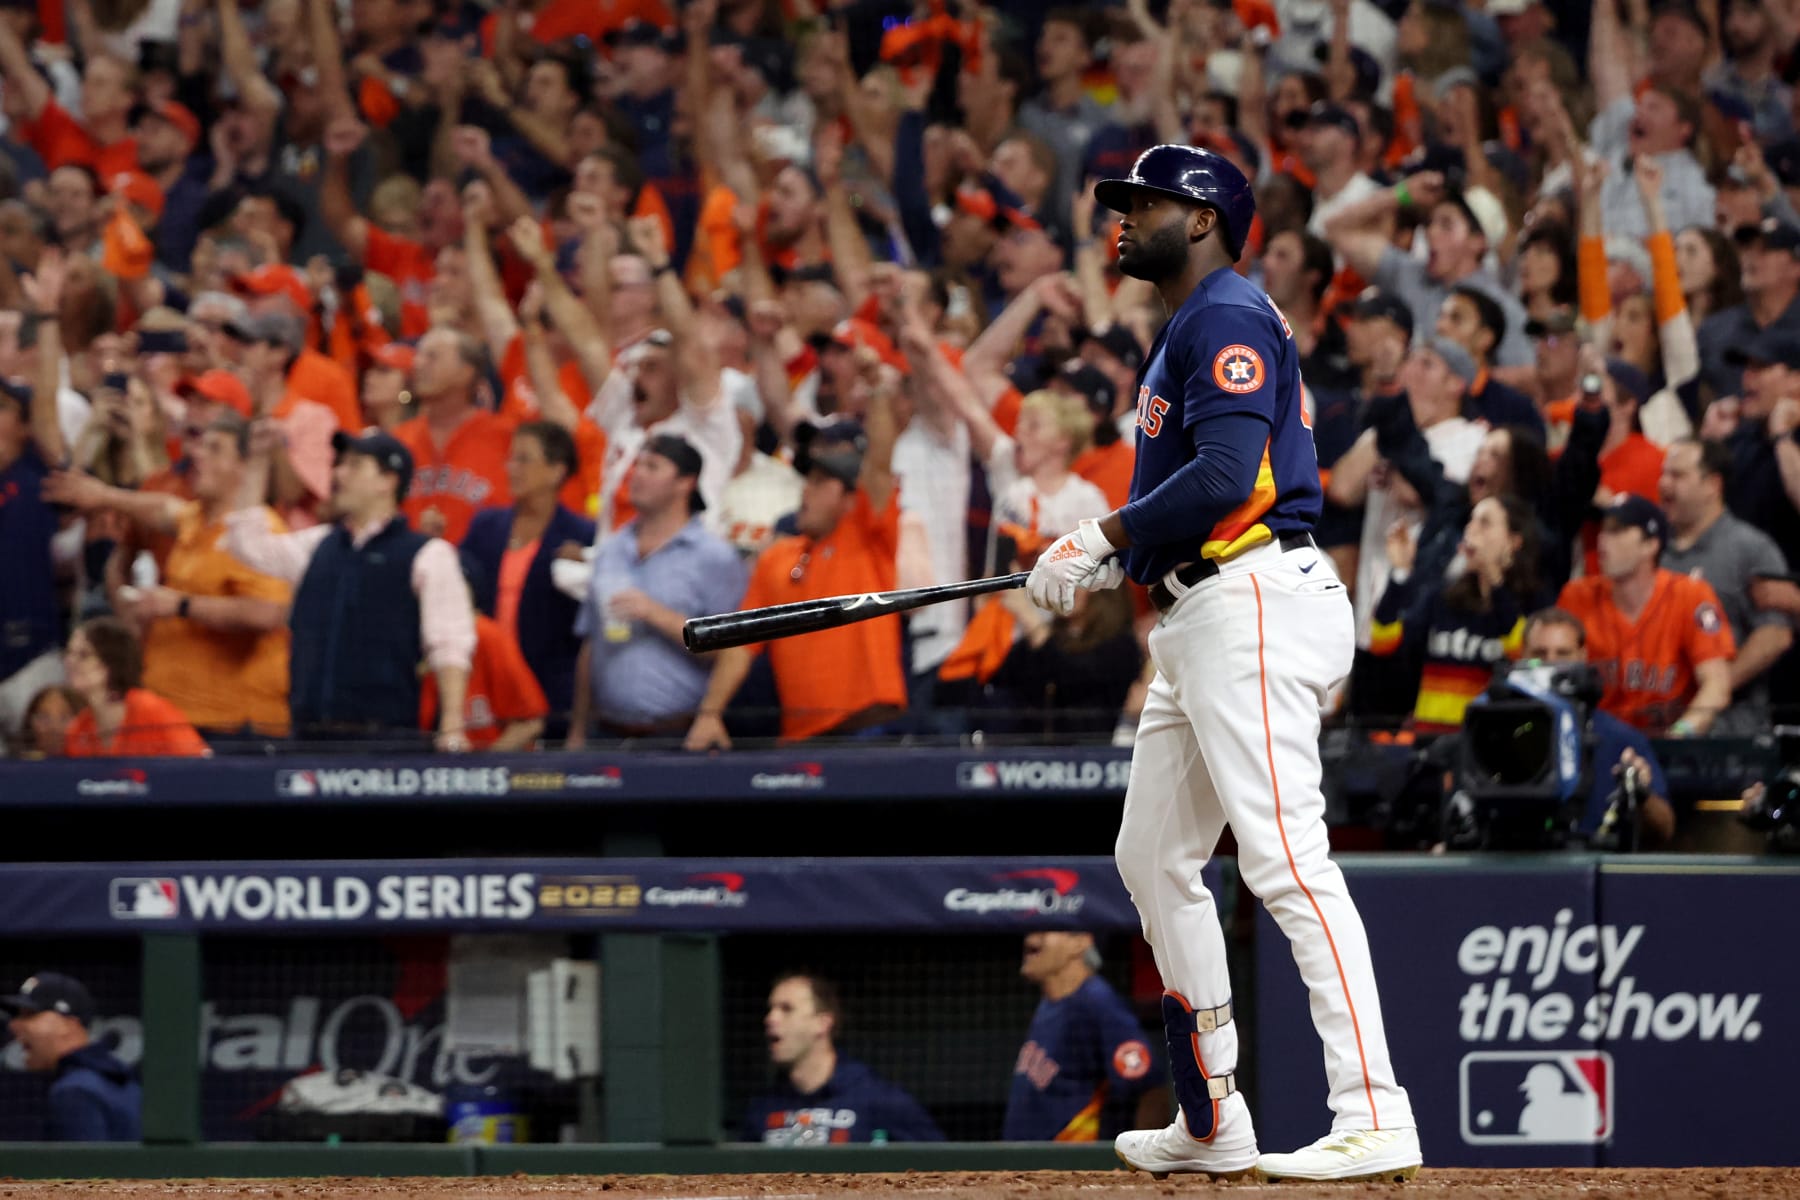 Why Astros fans shouldn't panic after shaky first 13 games